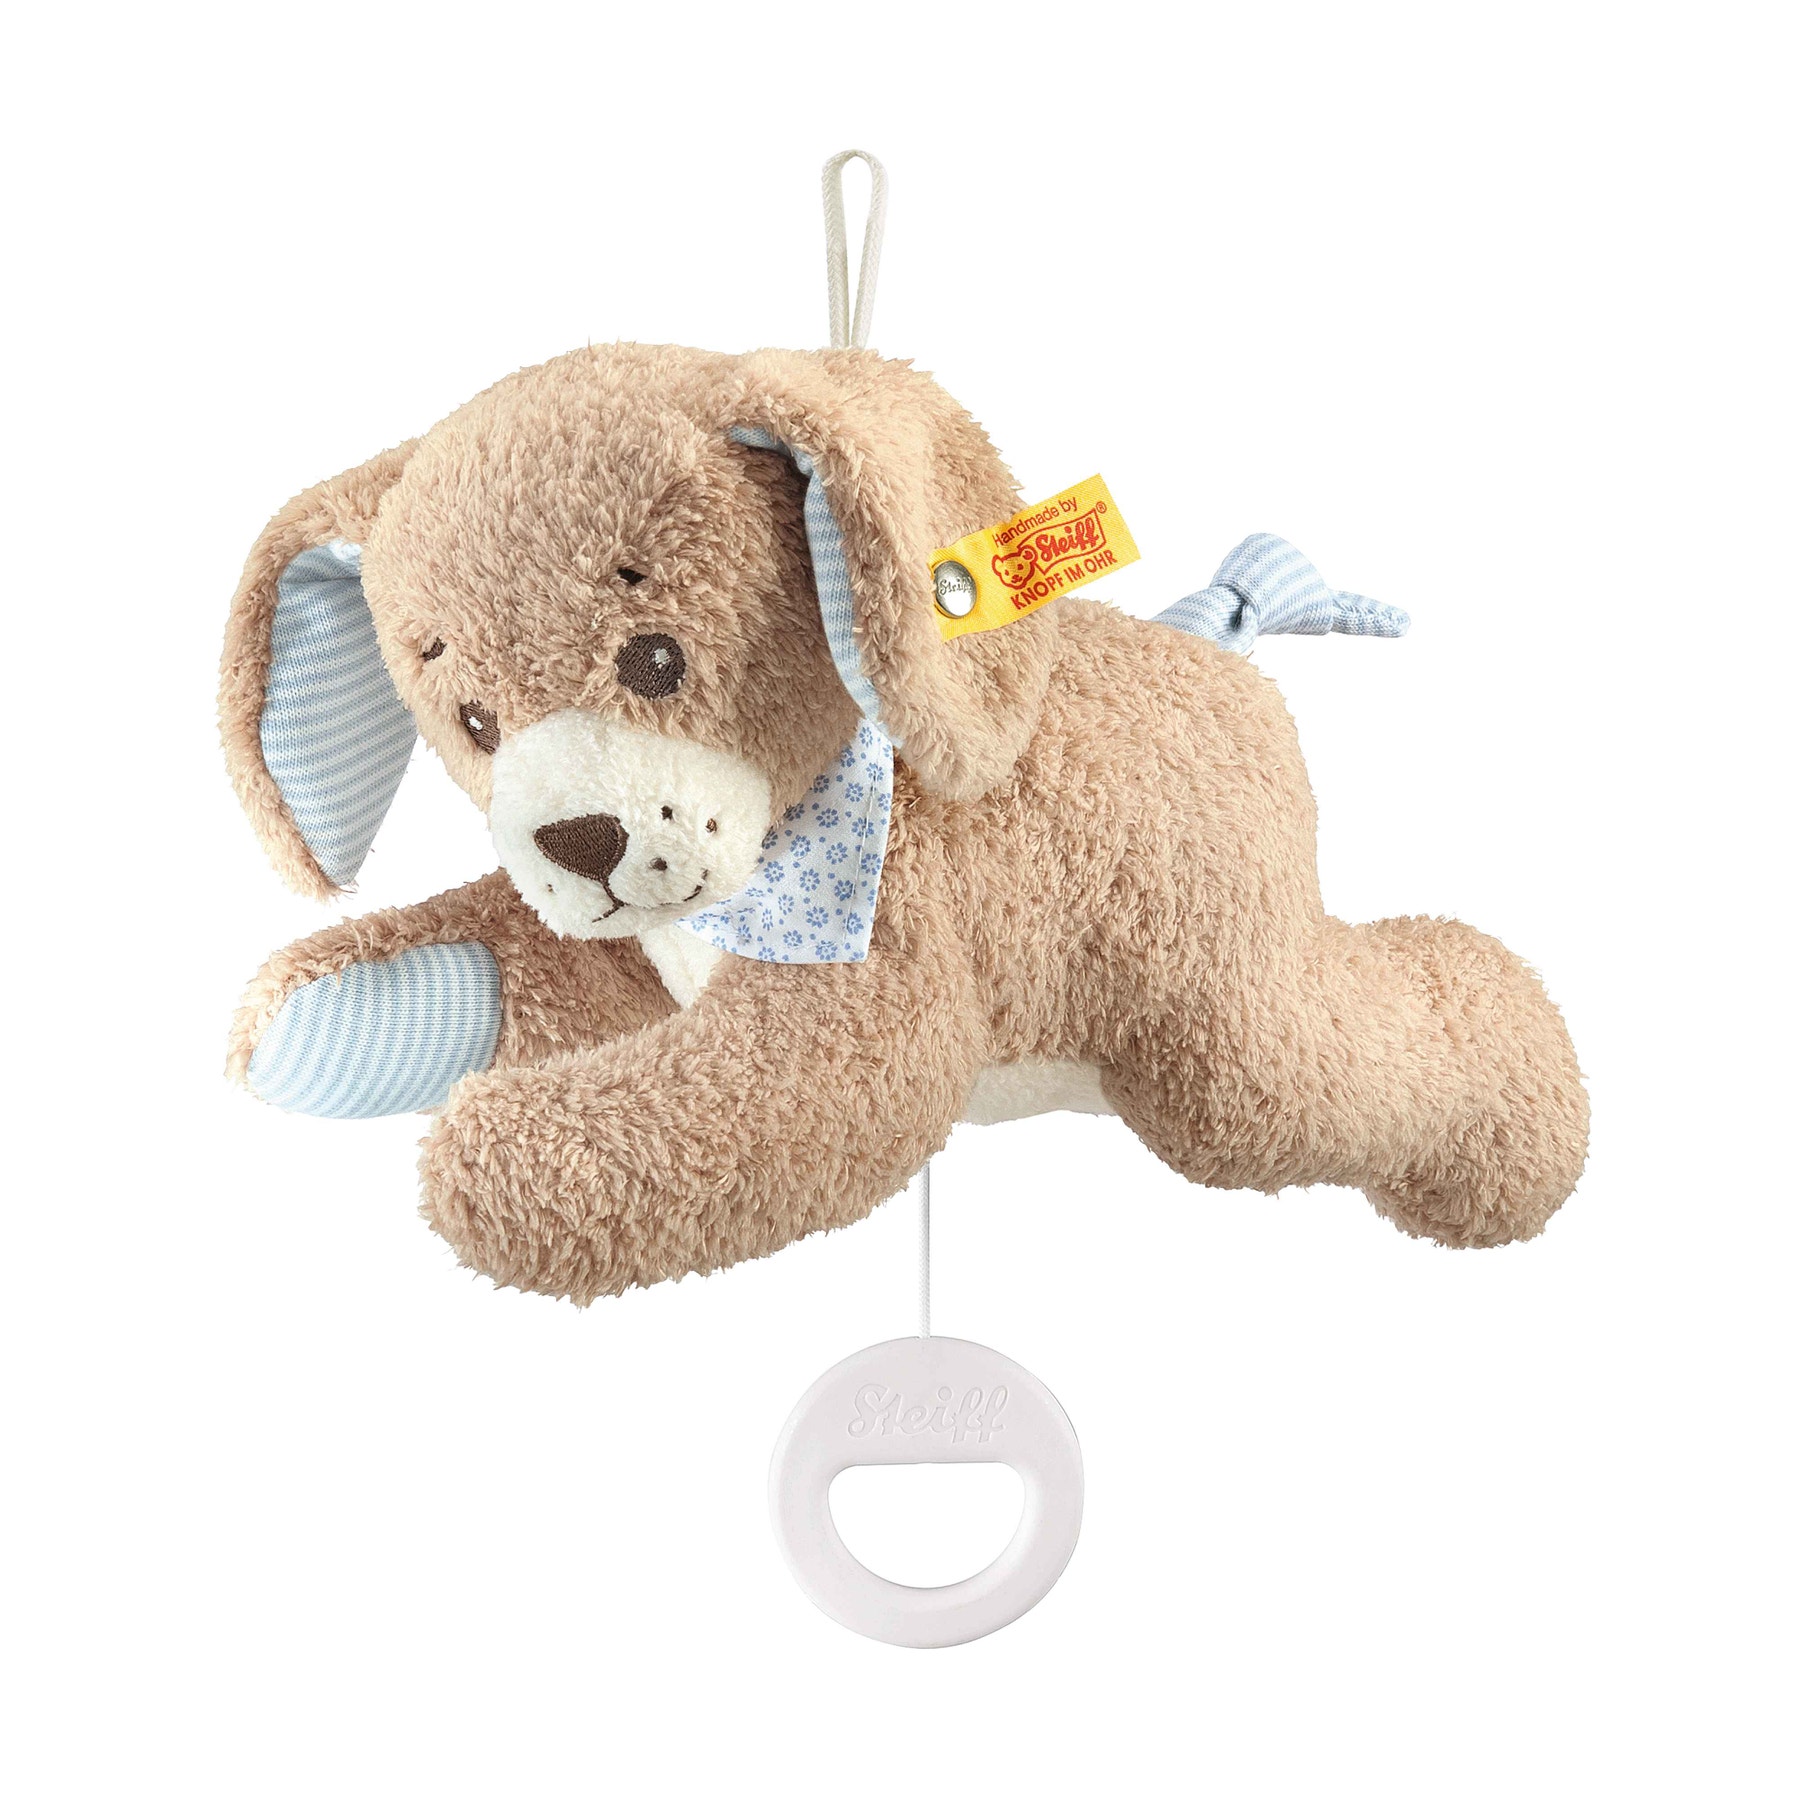 Good Night Dog Musical Pull Toy